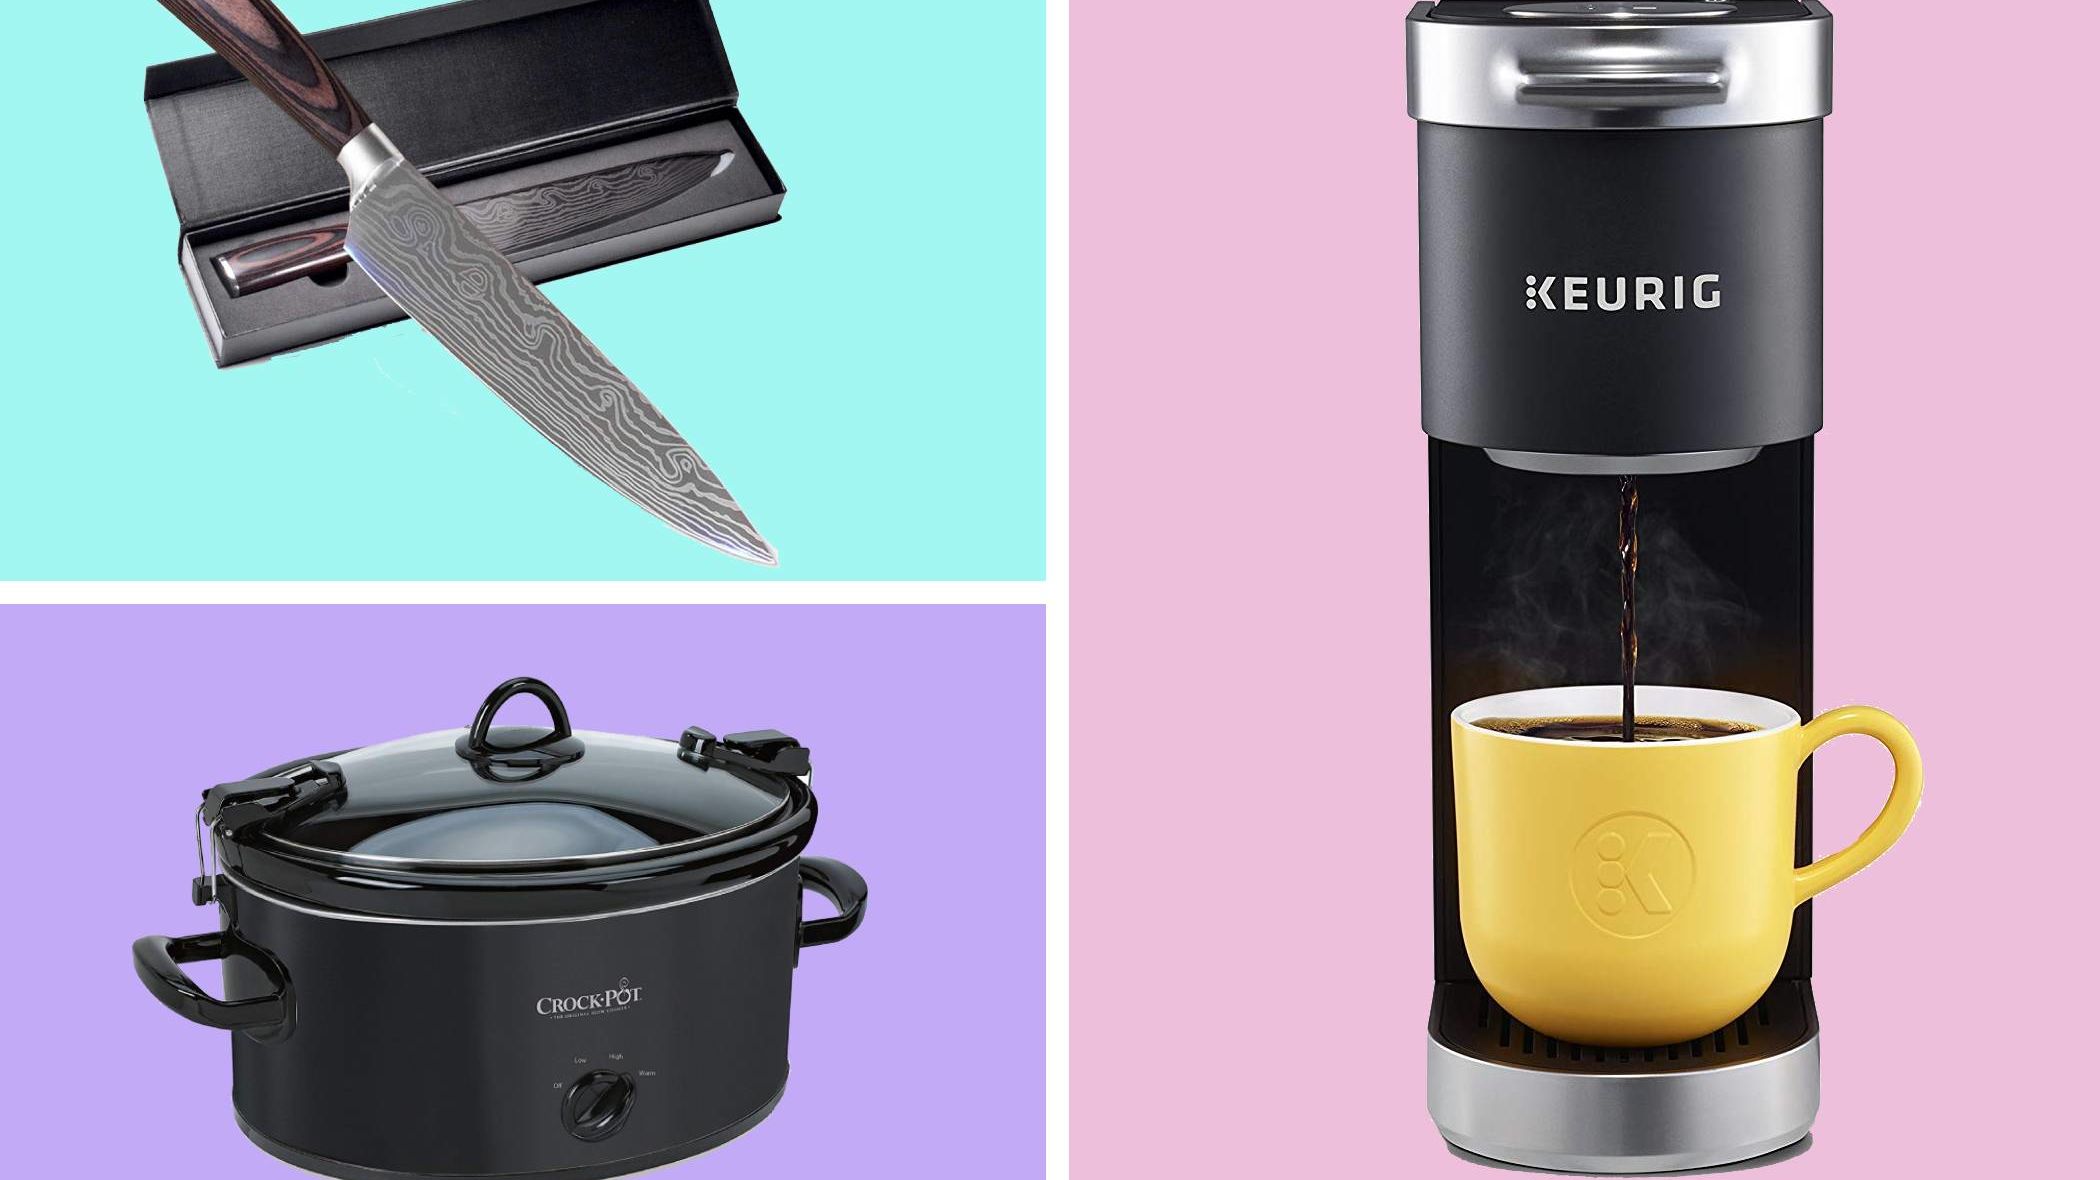 Most Popular Kitchen Products on Amazon | Mental Floss